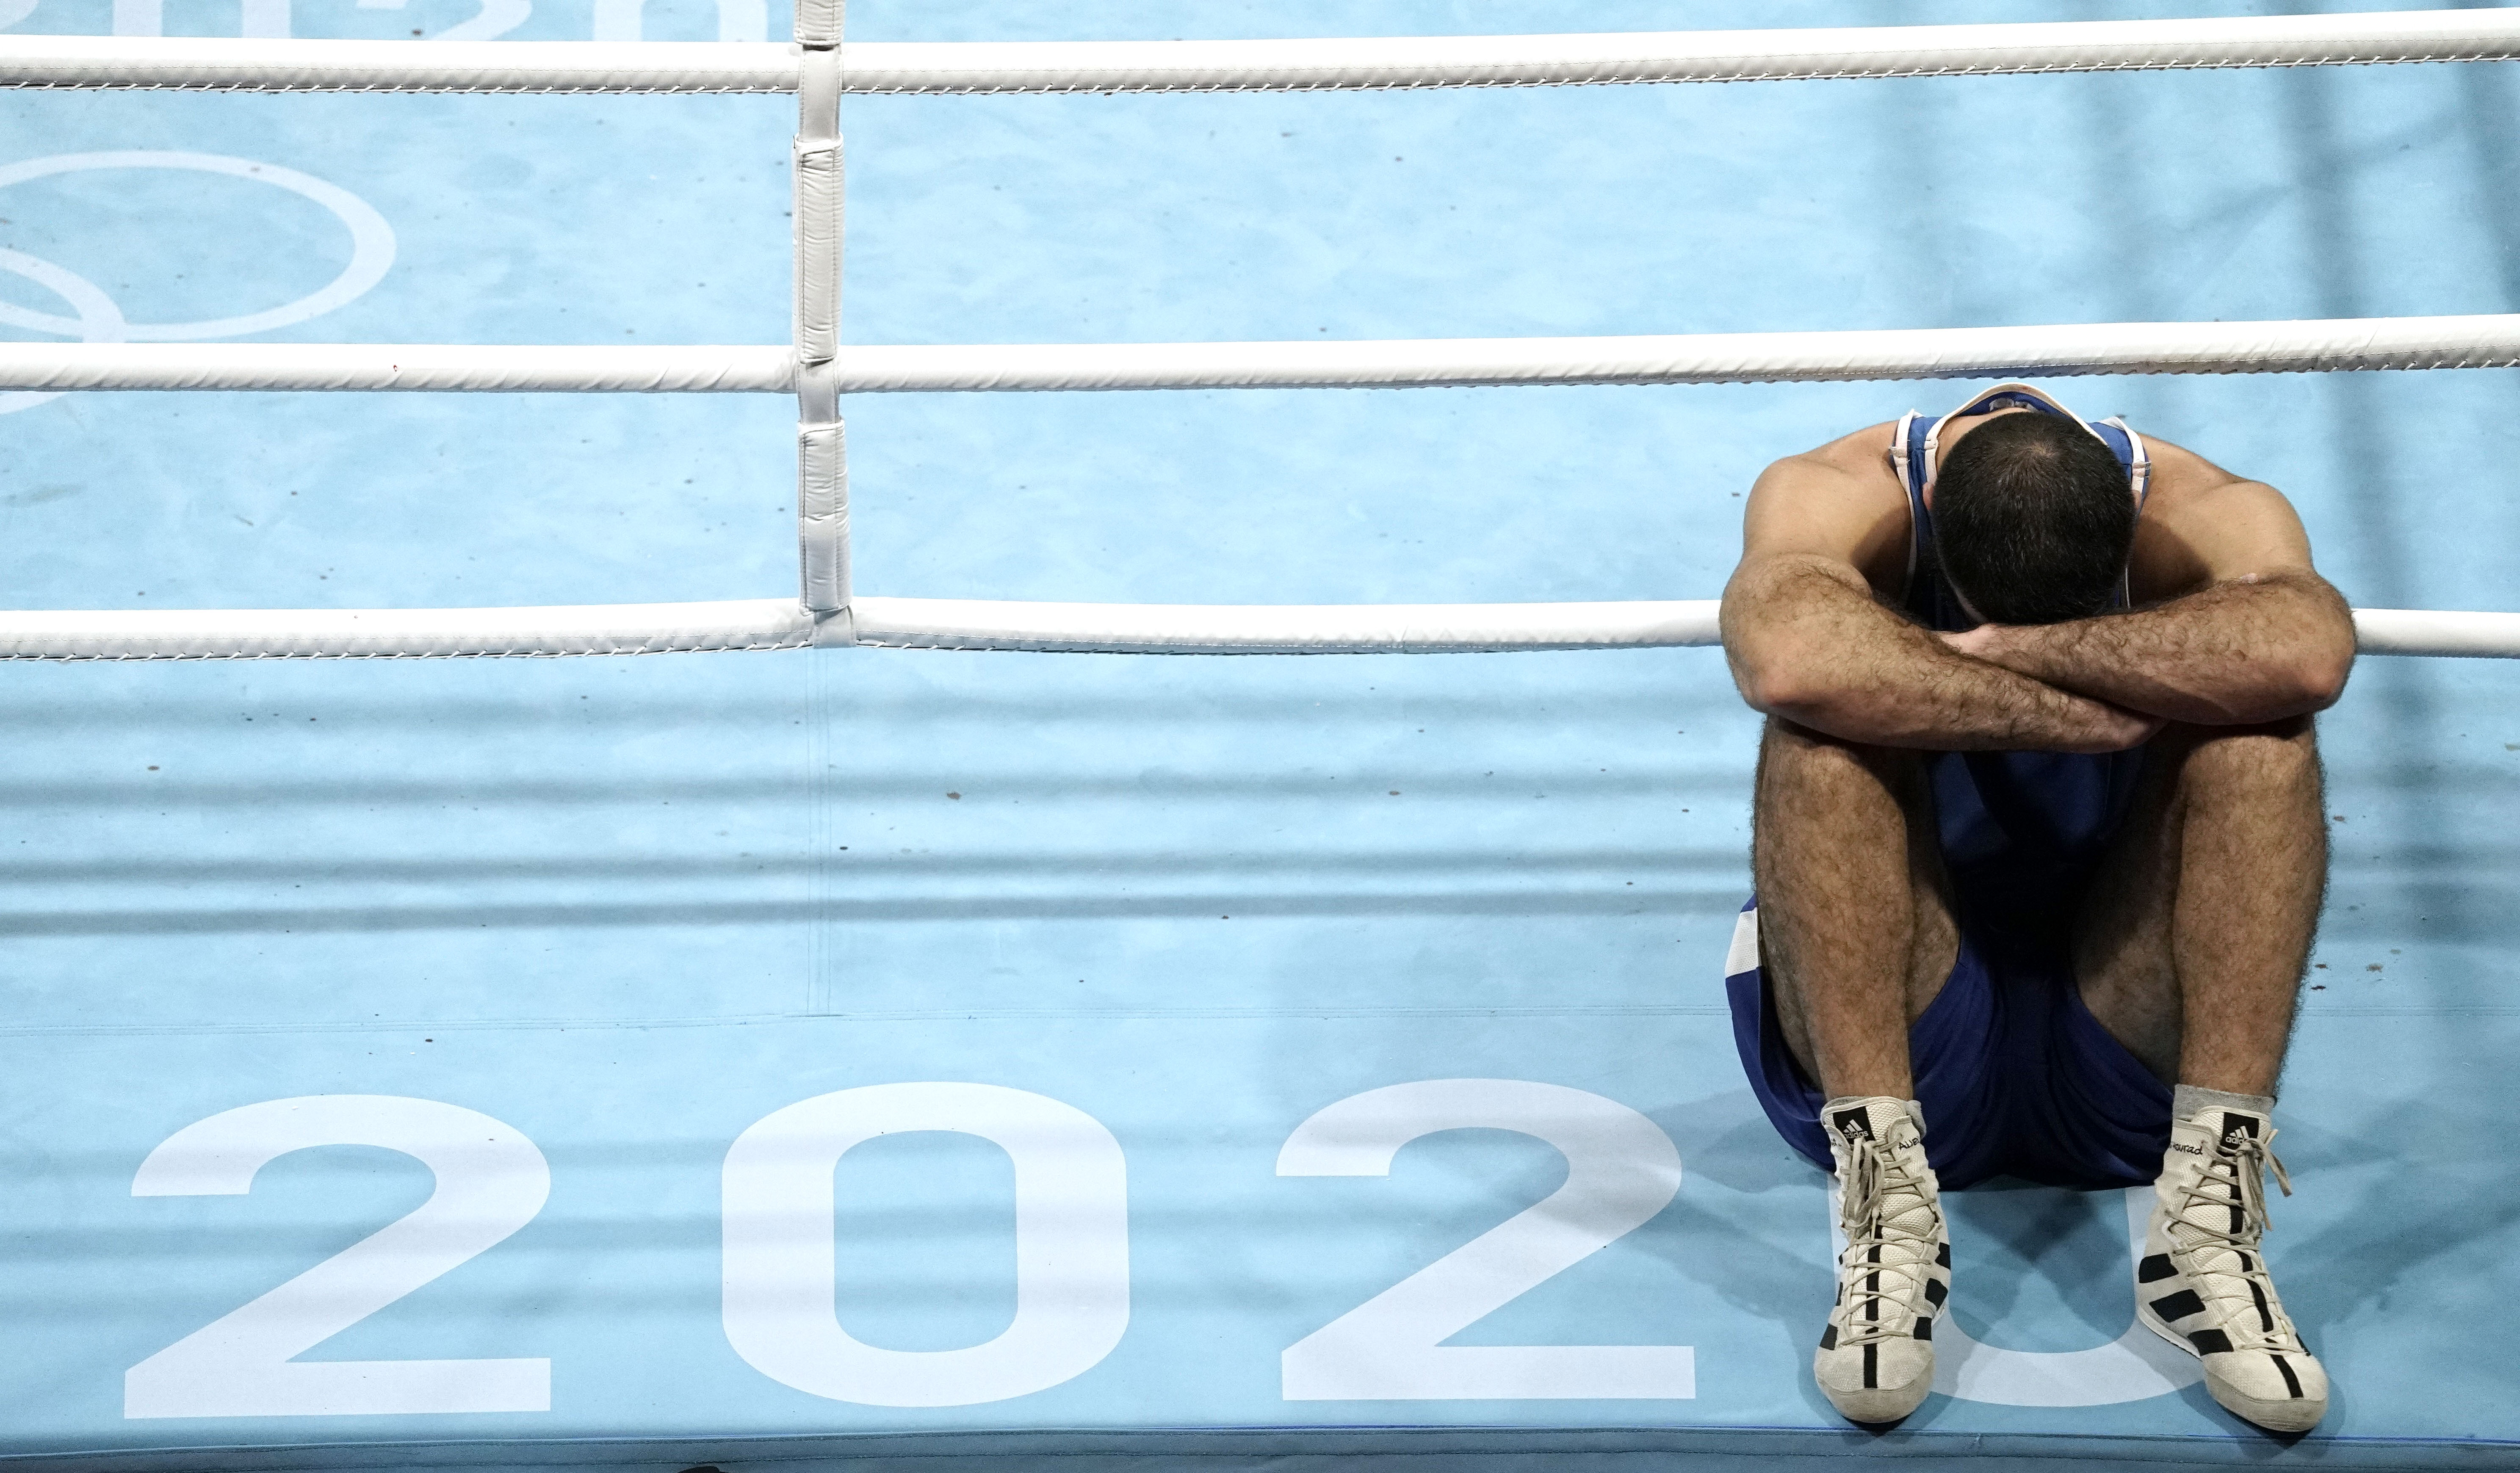 Olympics Boxing France S Aliev Protests With Sit In After Disqualification Reuters